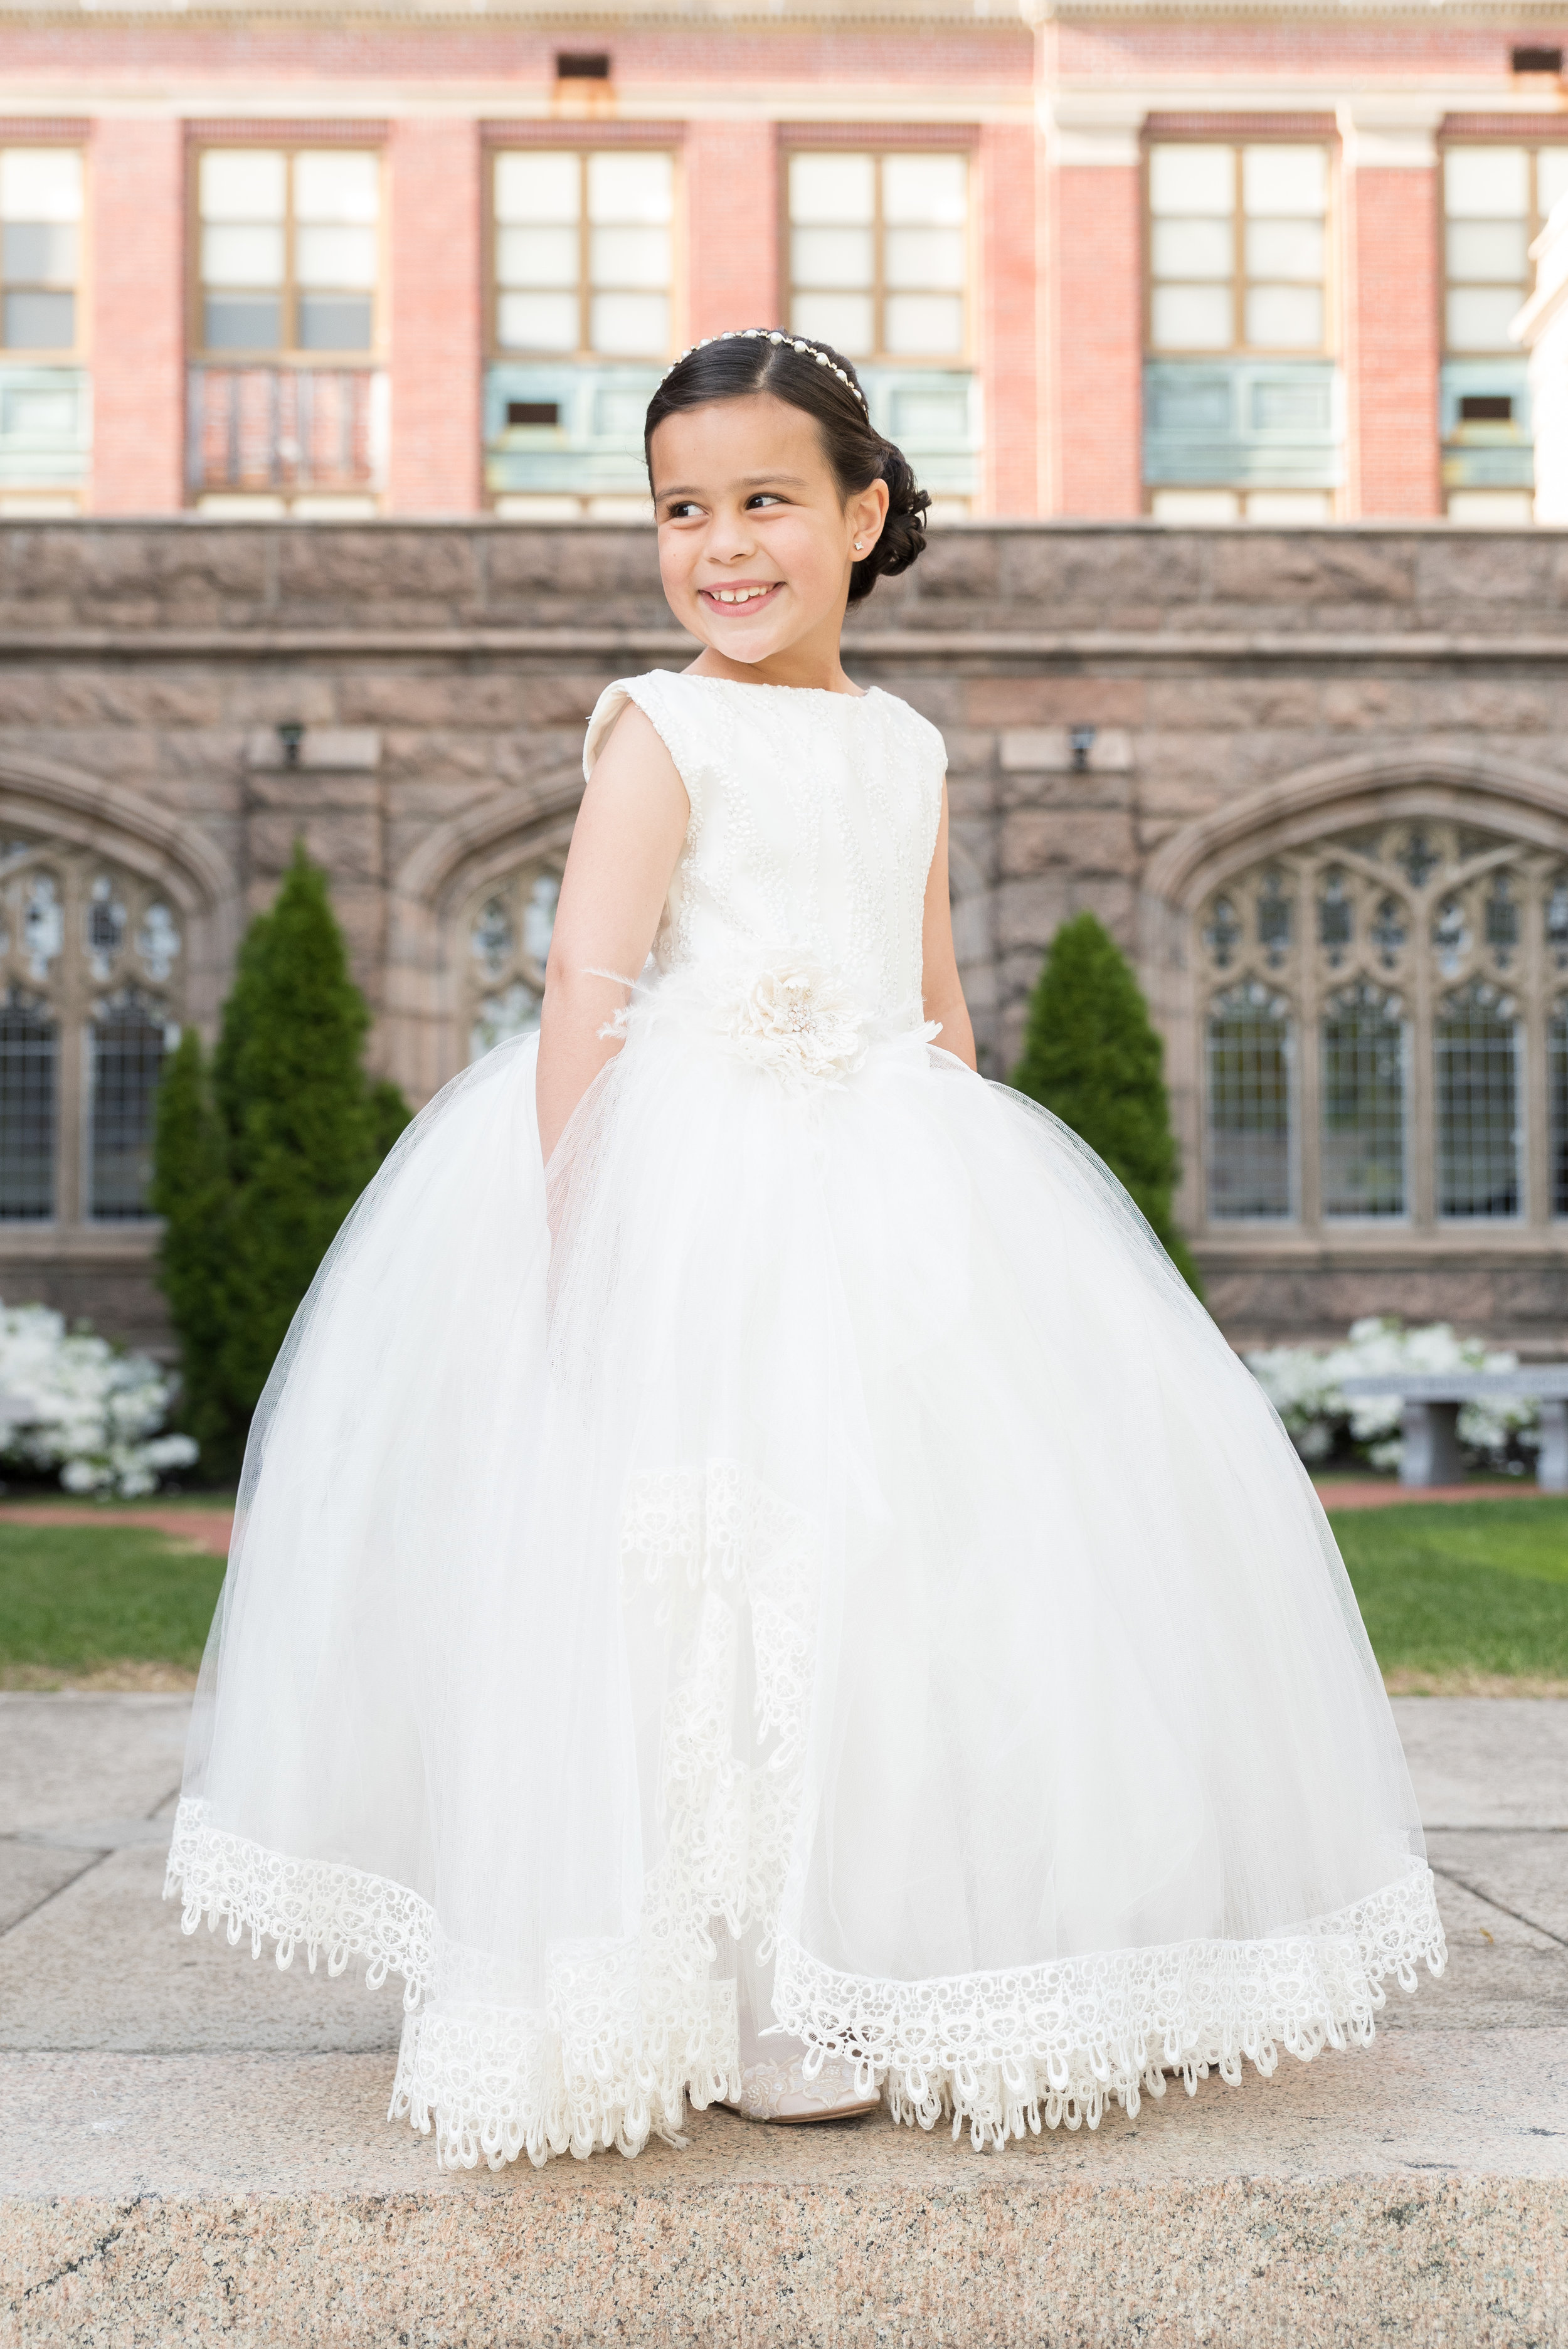 Fall River First Communion Portraits